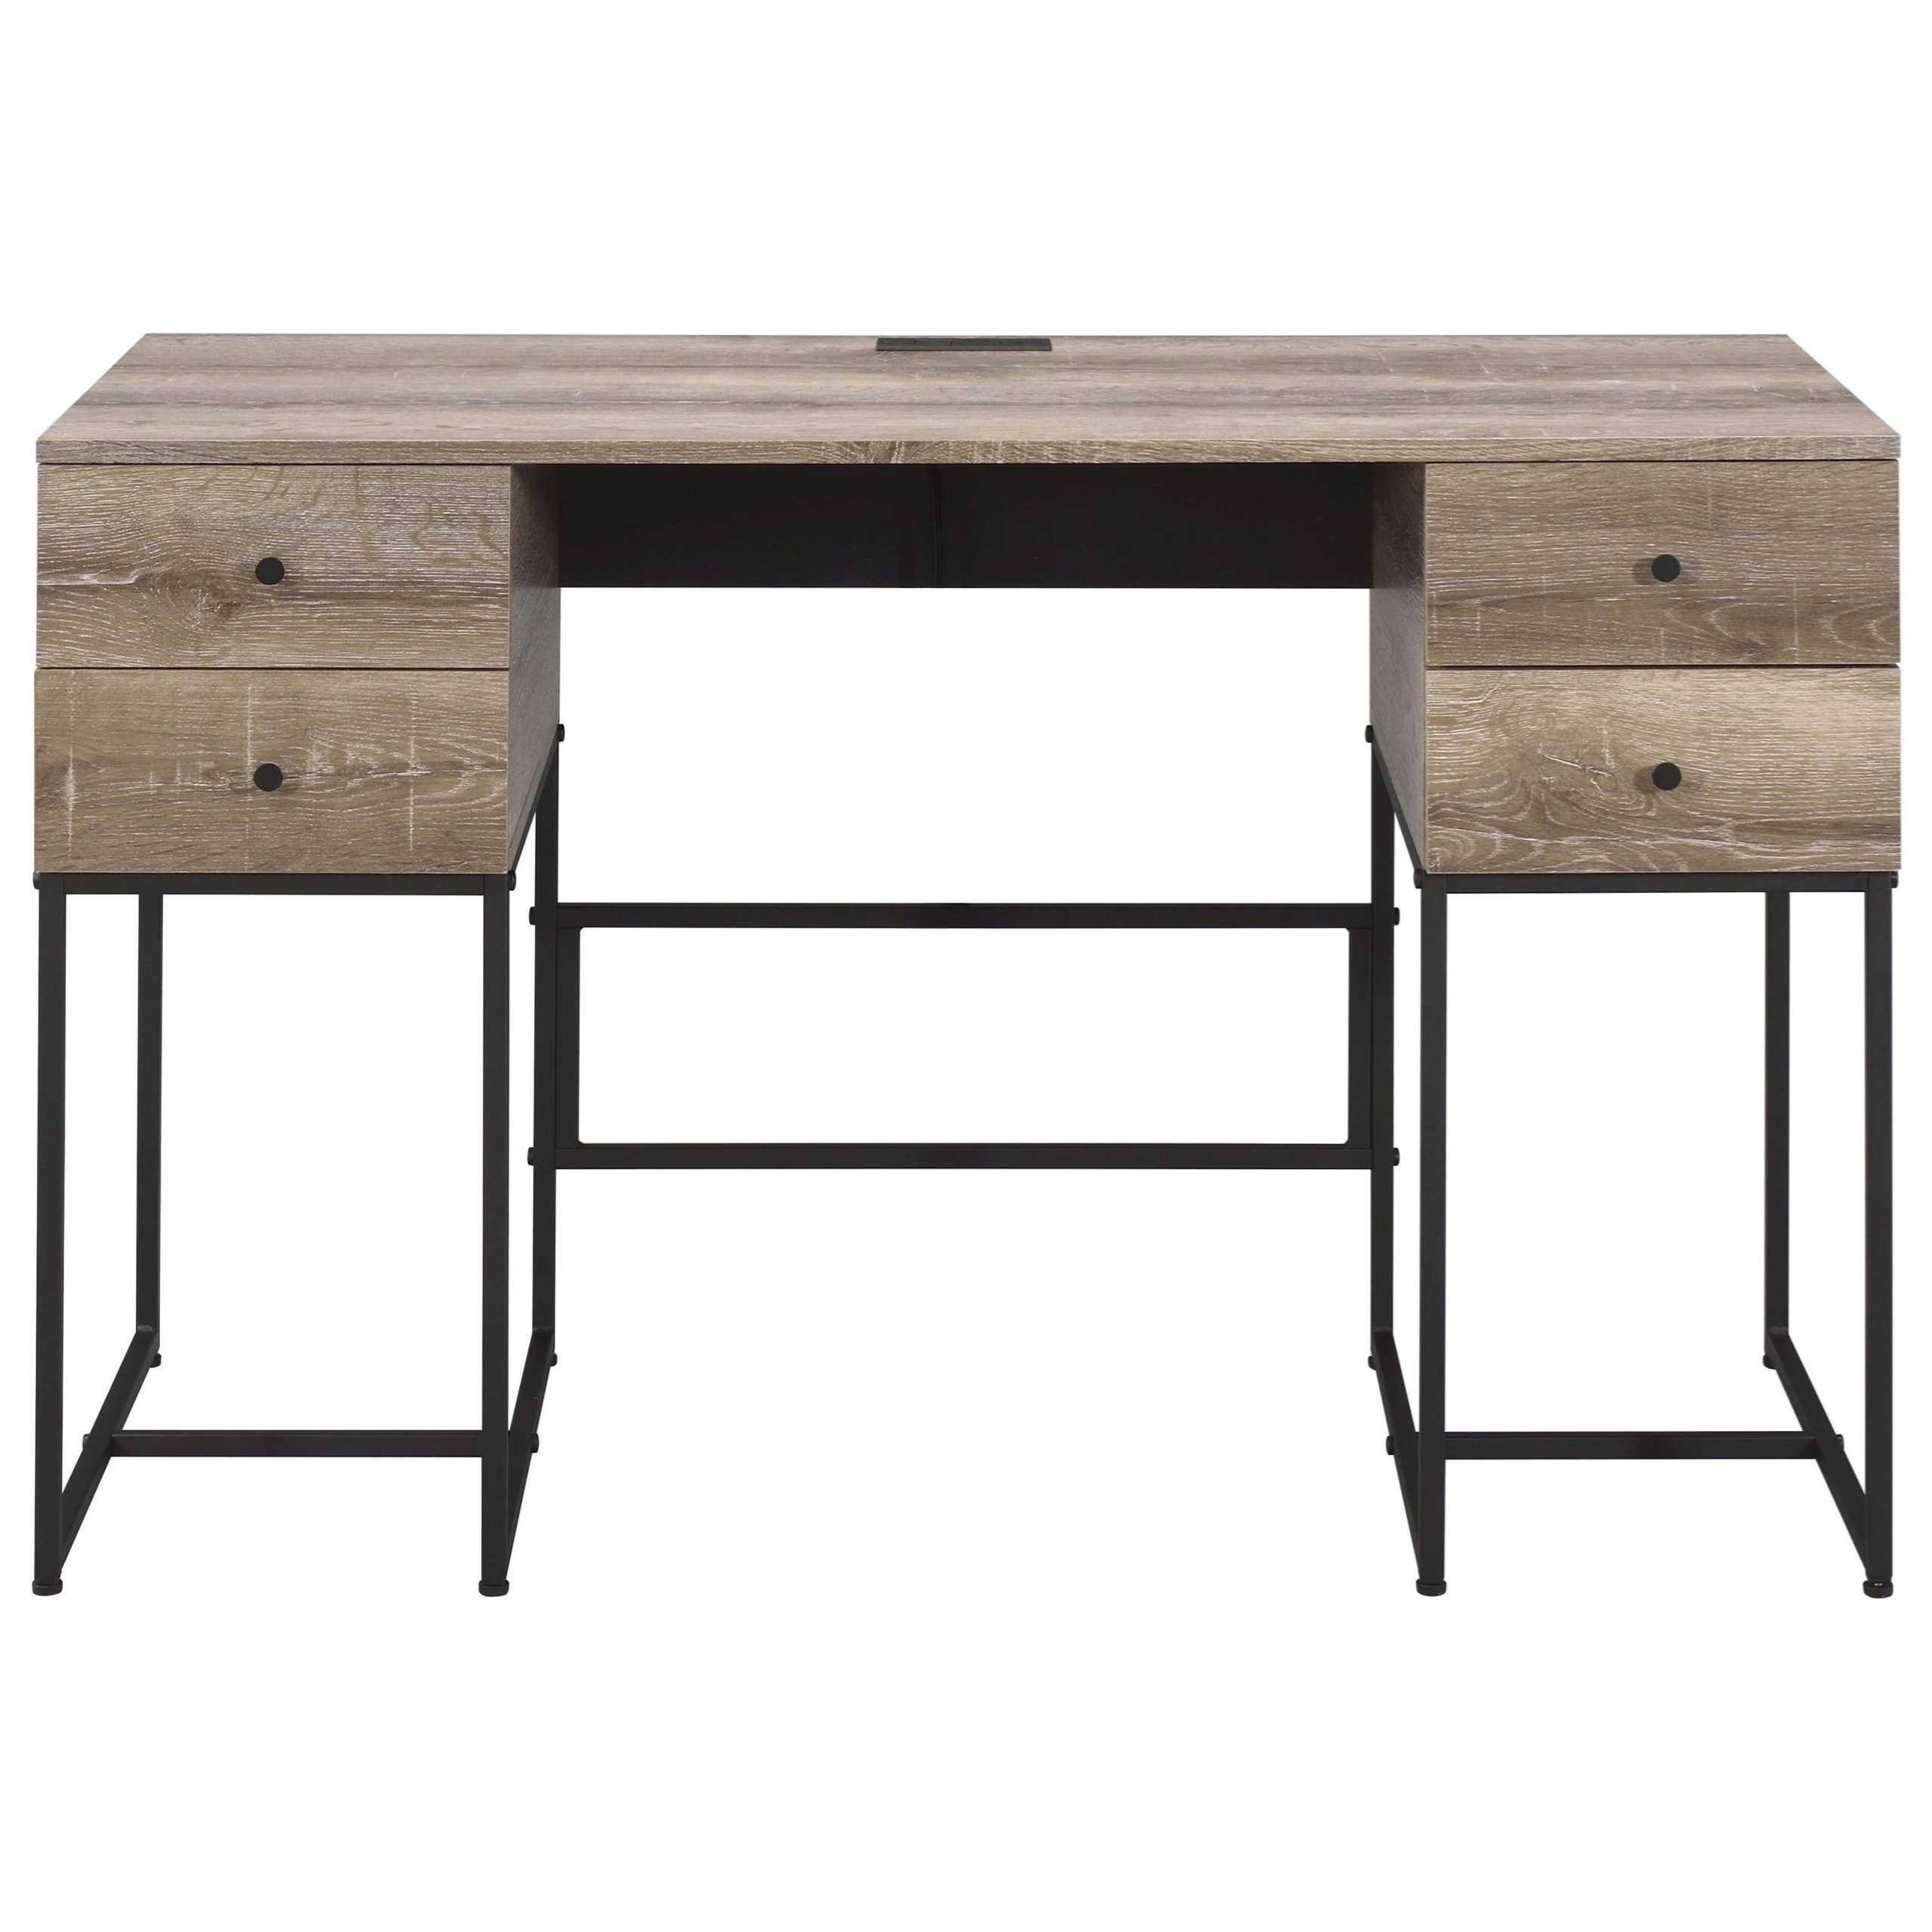 Acme Furniture Desirre Rustic Industrial 4 Drawer Desk With Usb Ports Pertaining To Acacia Wood Writing Desks With Usb Ports (View 10 of 15)